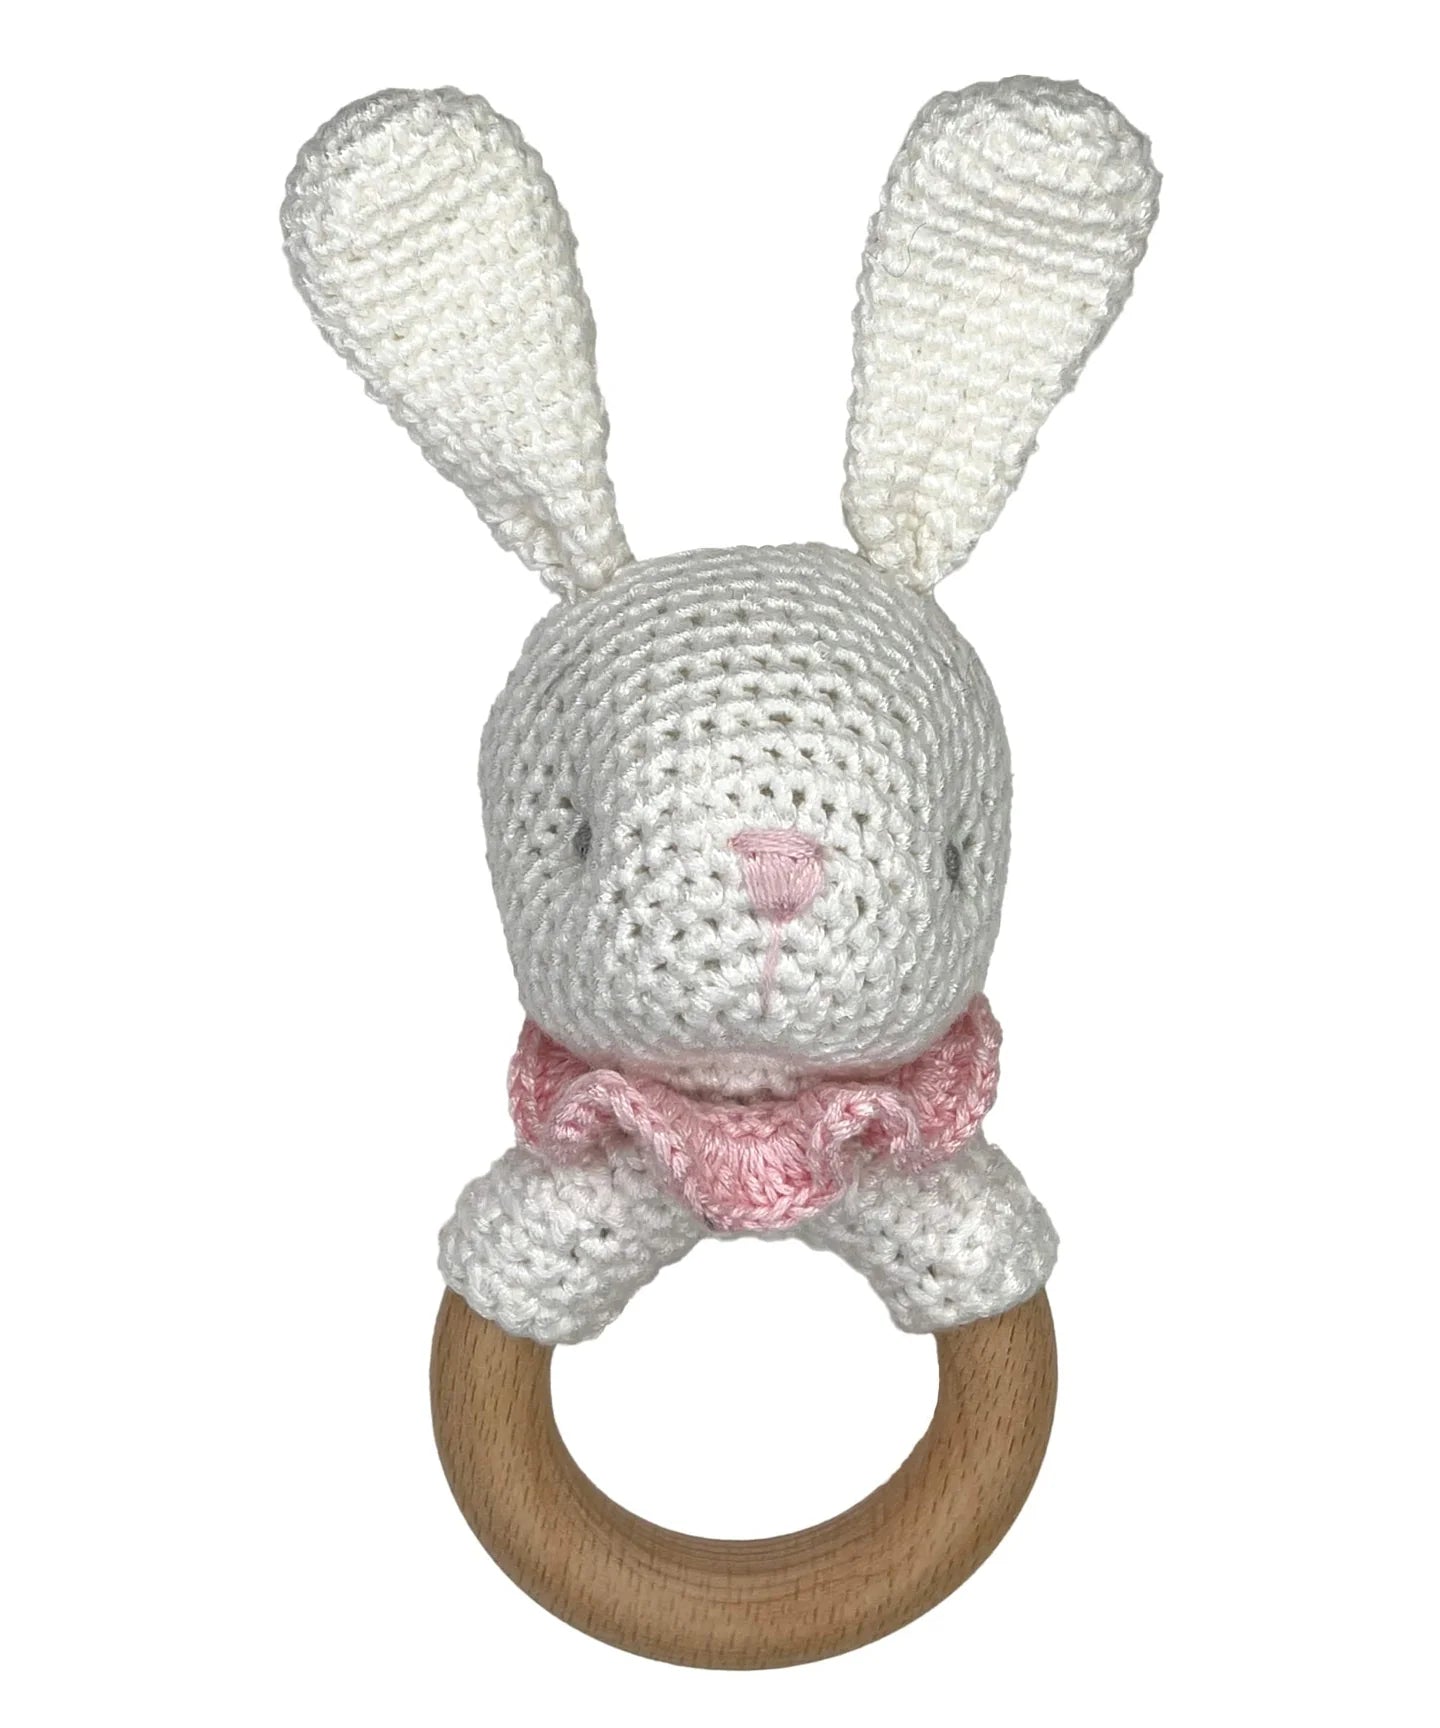 Zubles Bunny Bamboo Crochet Woodring Rattle - Pink